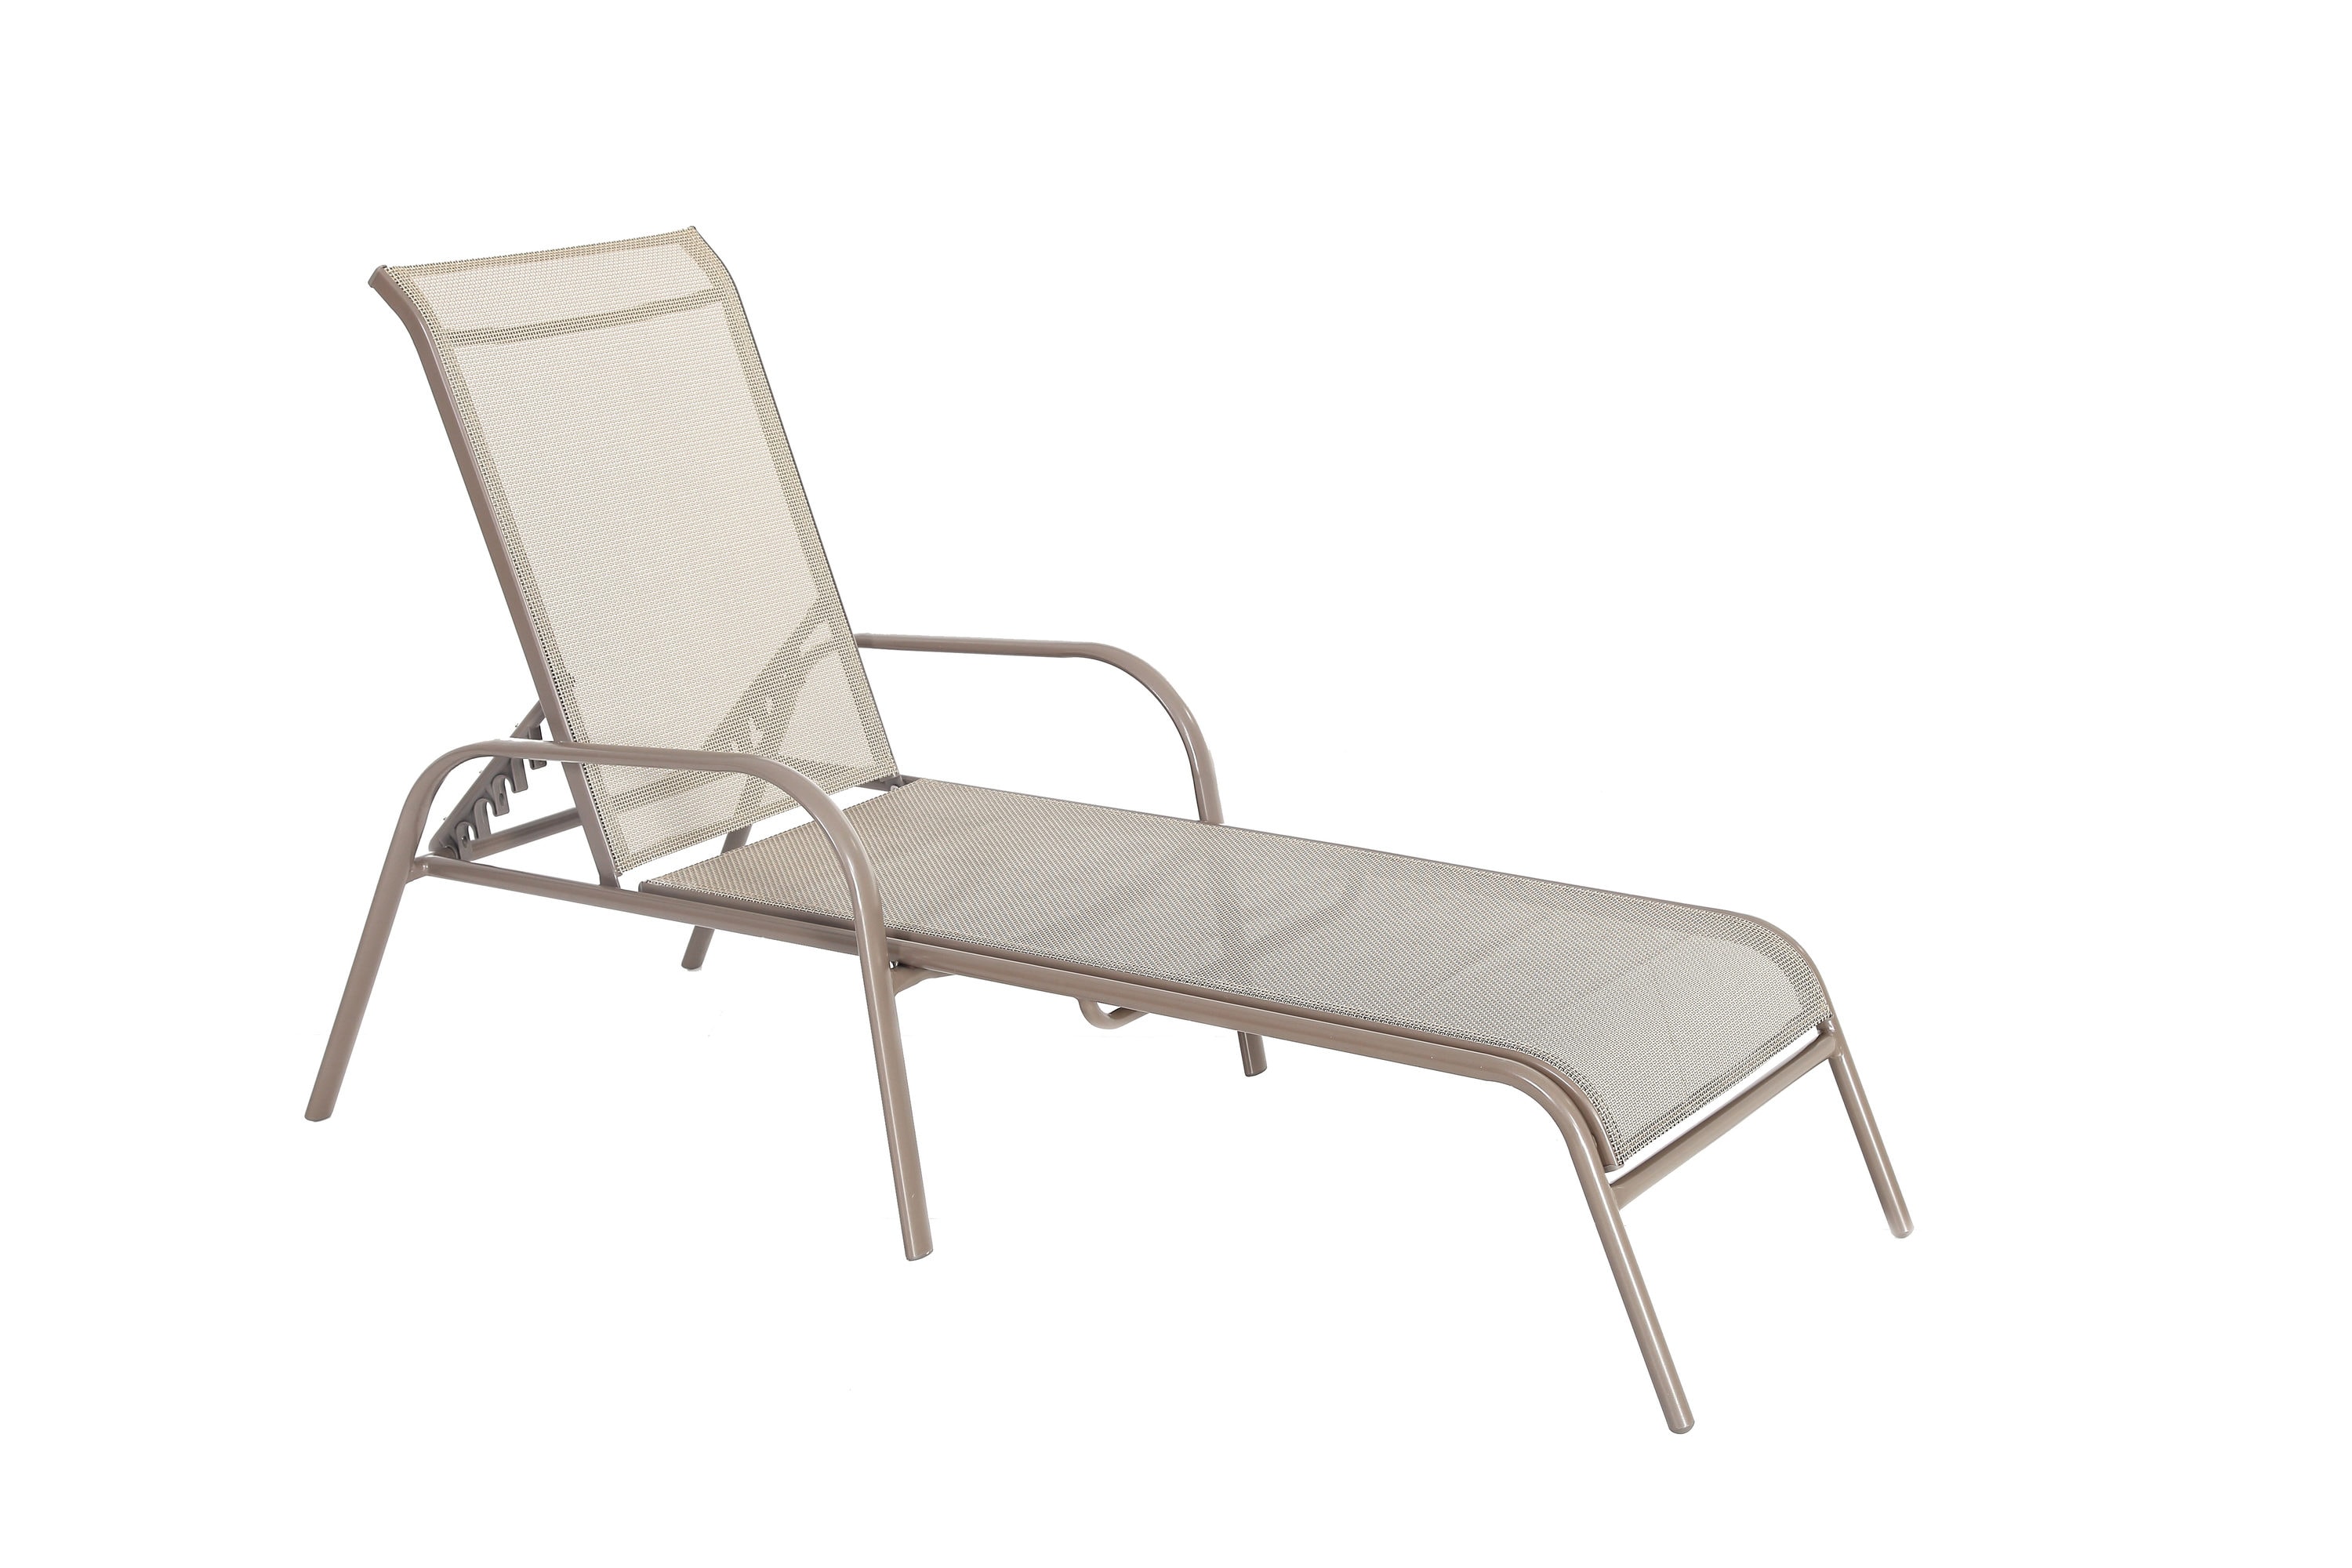 Garden Treasures Driscol Stackable Tan Metal Frame Stationary Chaise Lounge  Chair(S) With Tan Sling Seat In The Patio Chairs Department At Lowes.Com